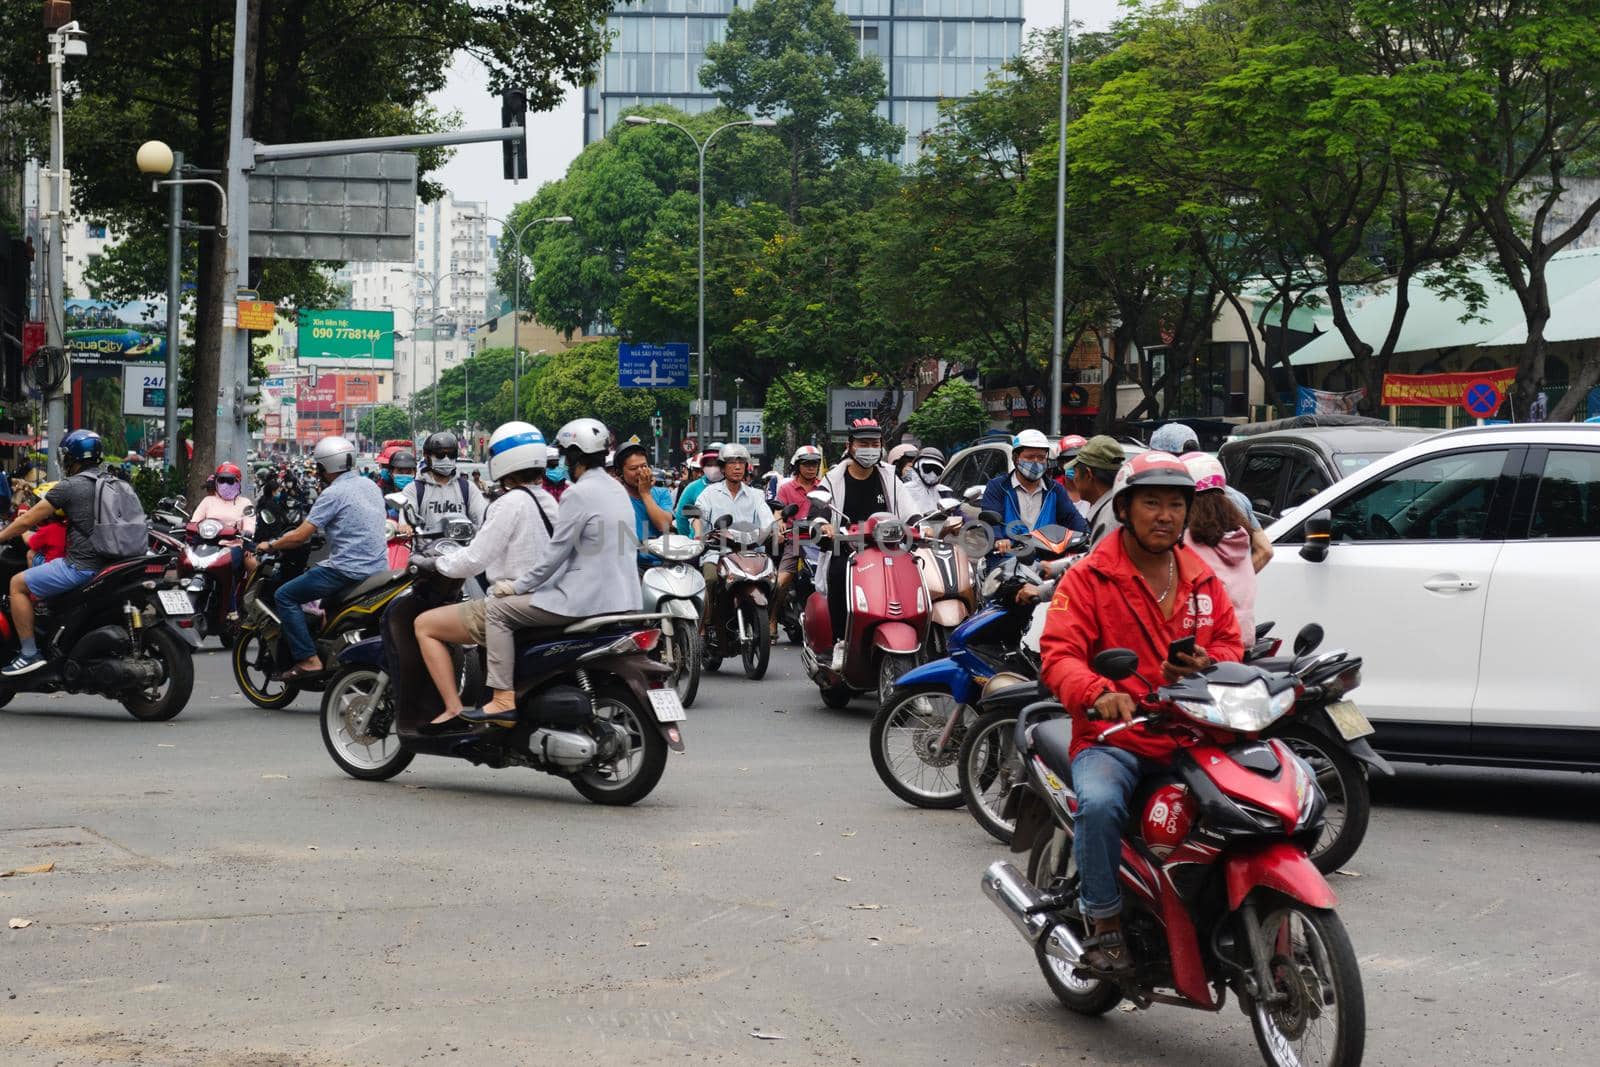 2019-11-10 / Ho Chi Minh City, Vietnam - Urban scene in rush hour. Motorcycles flood the chaotic traffic flow of the city. by hernan_hyper